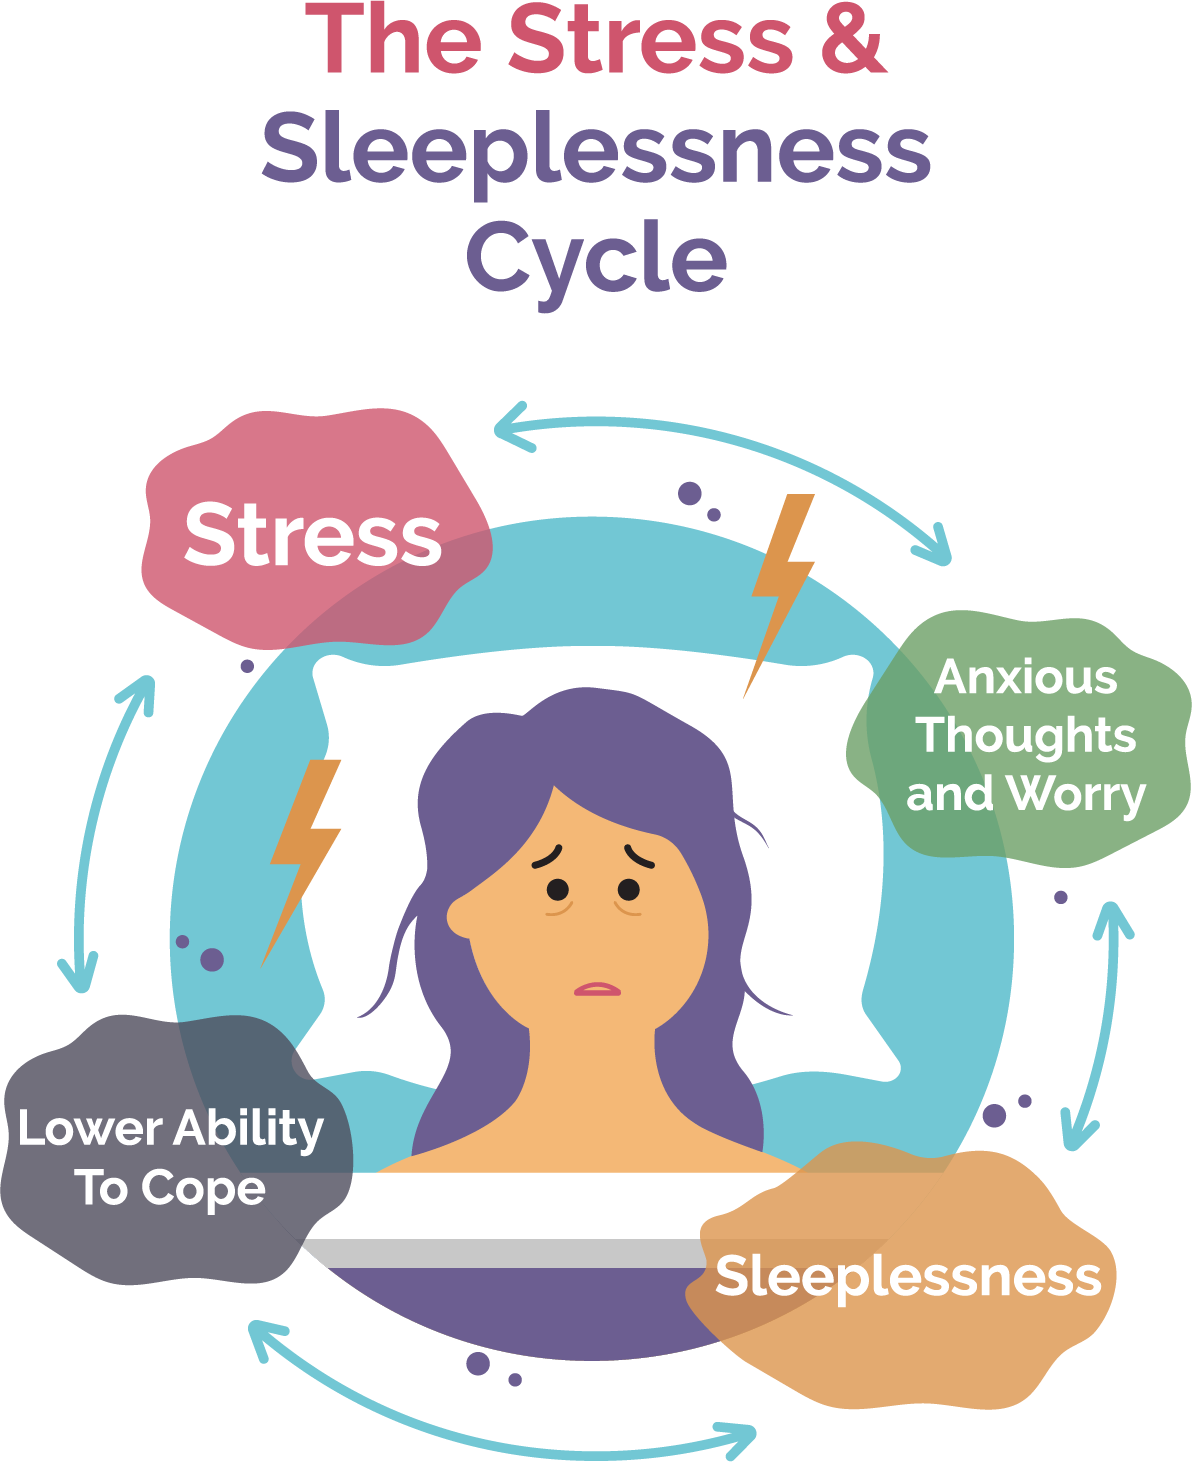 Graphic image of The Stress and Sleeplessness Cycle